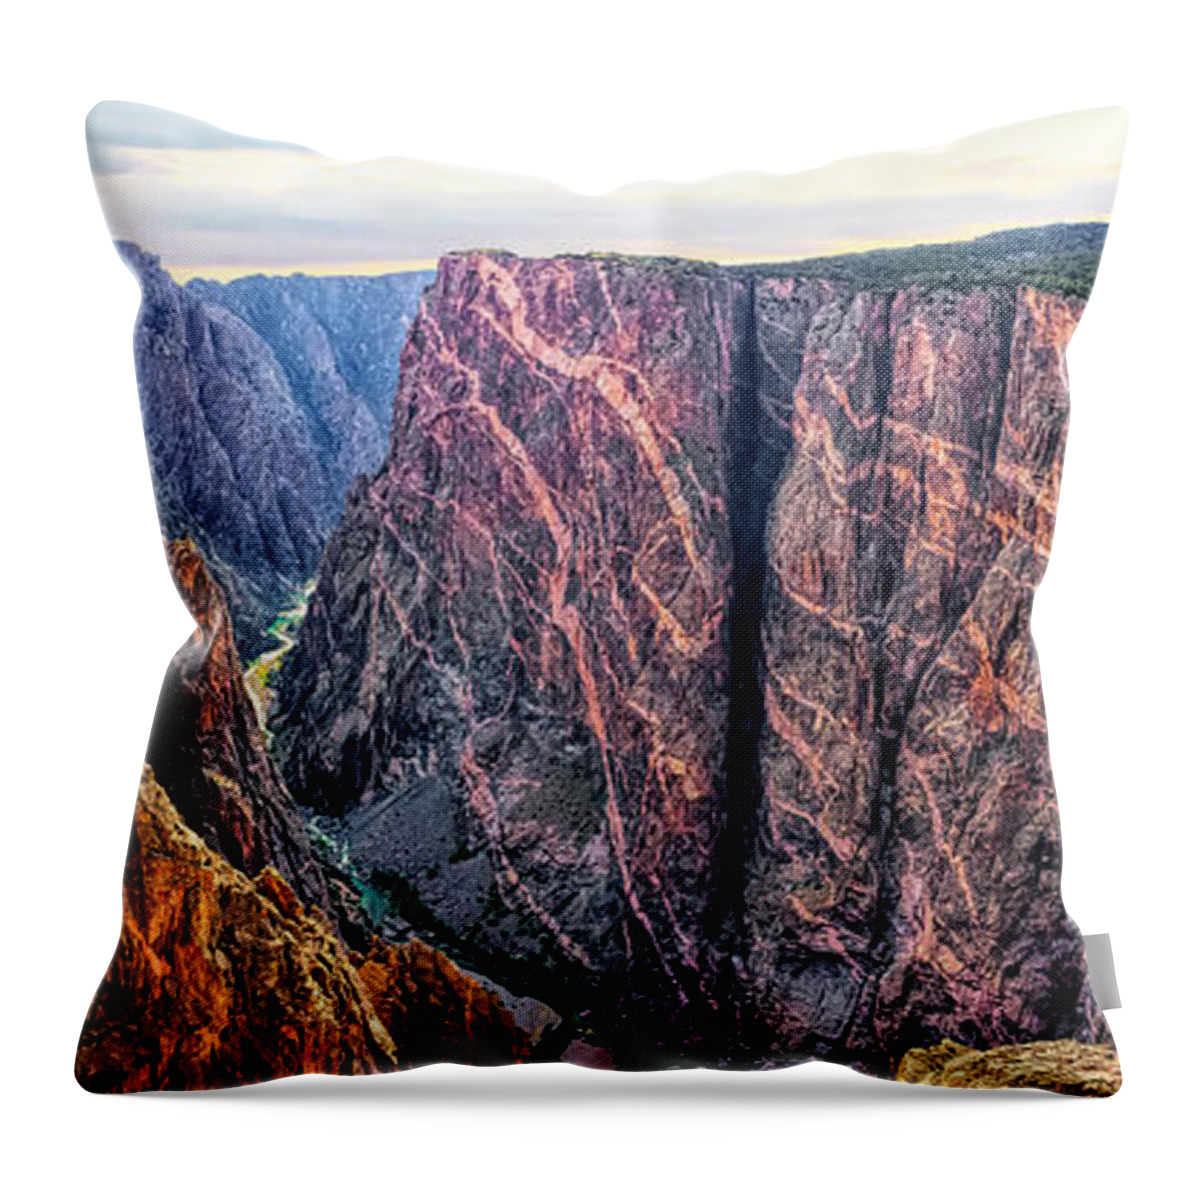 Canyon Throw Pillow featuring the photograph Painted Wall by Rick Wicker